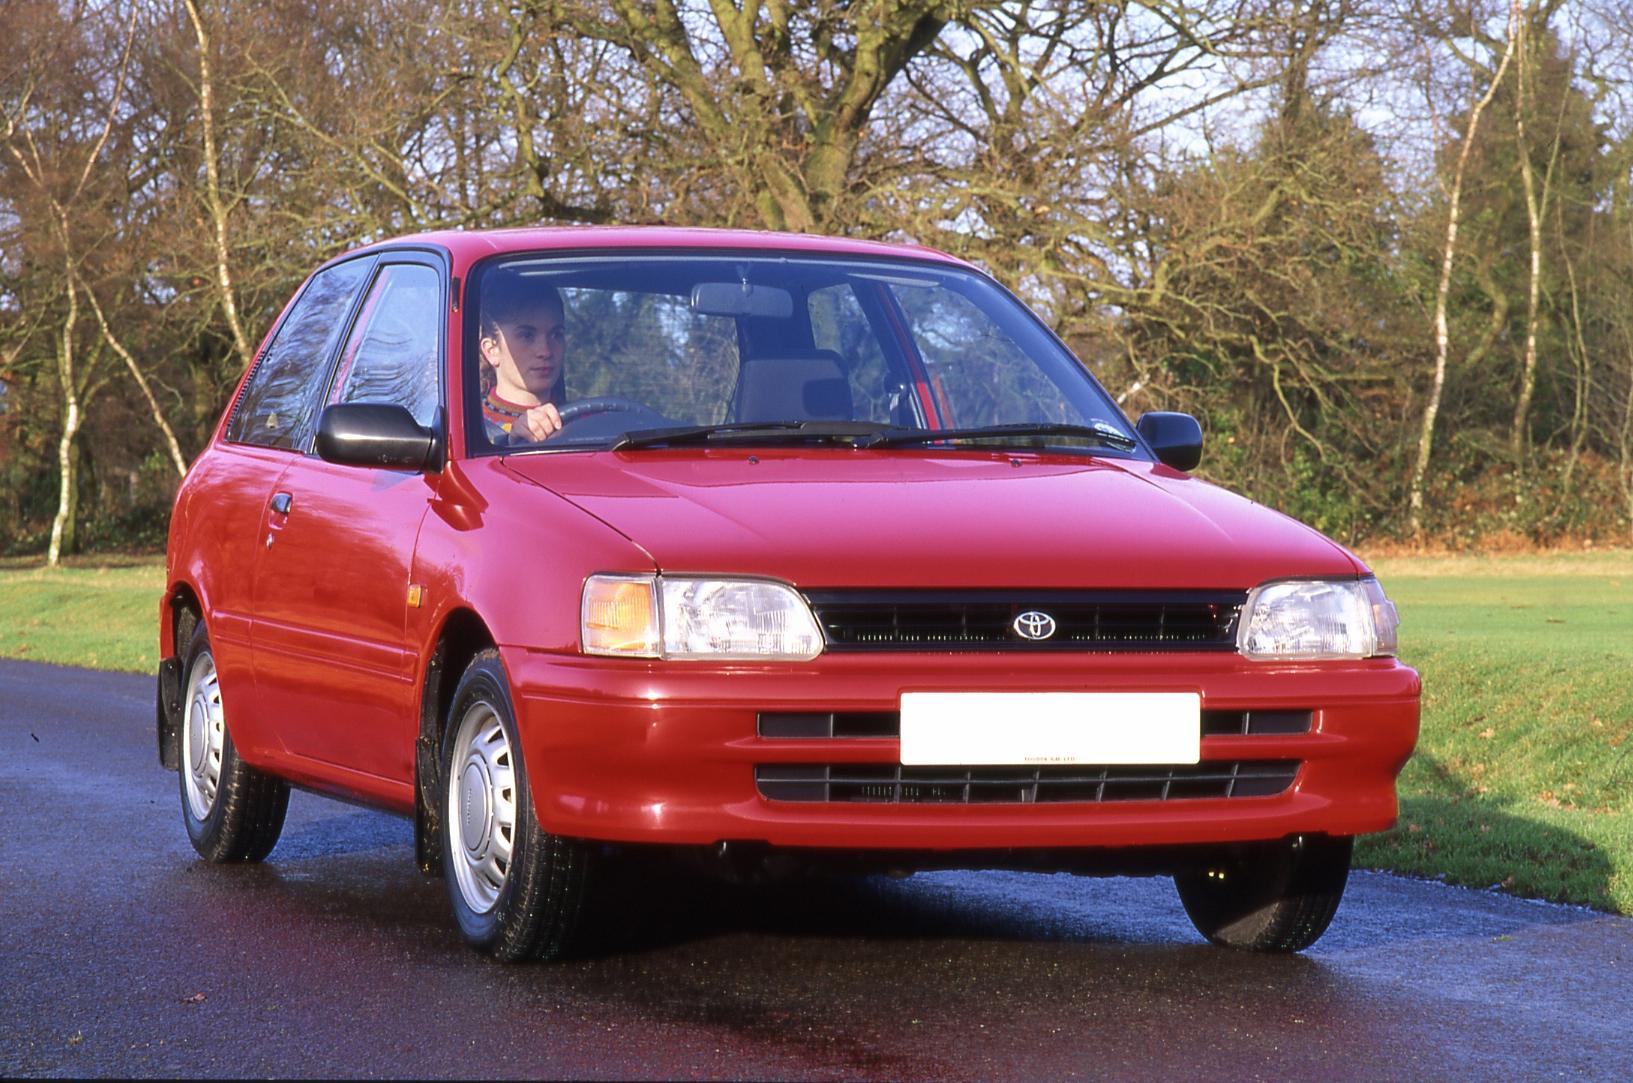 A red 1990 Toyota Starlet driving down the street